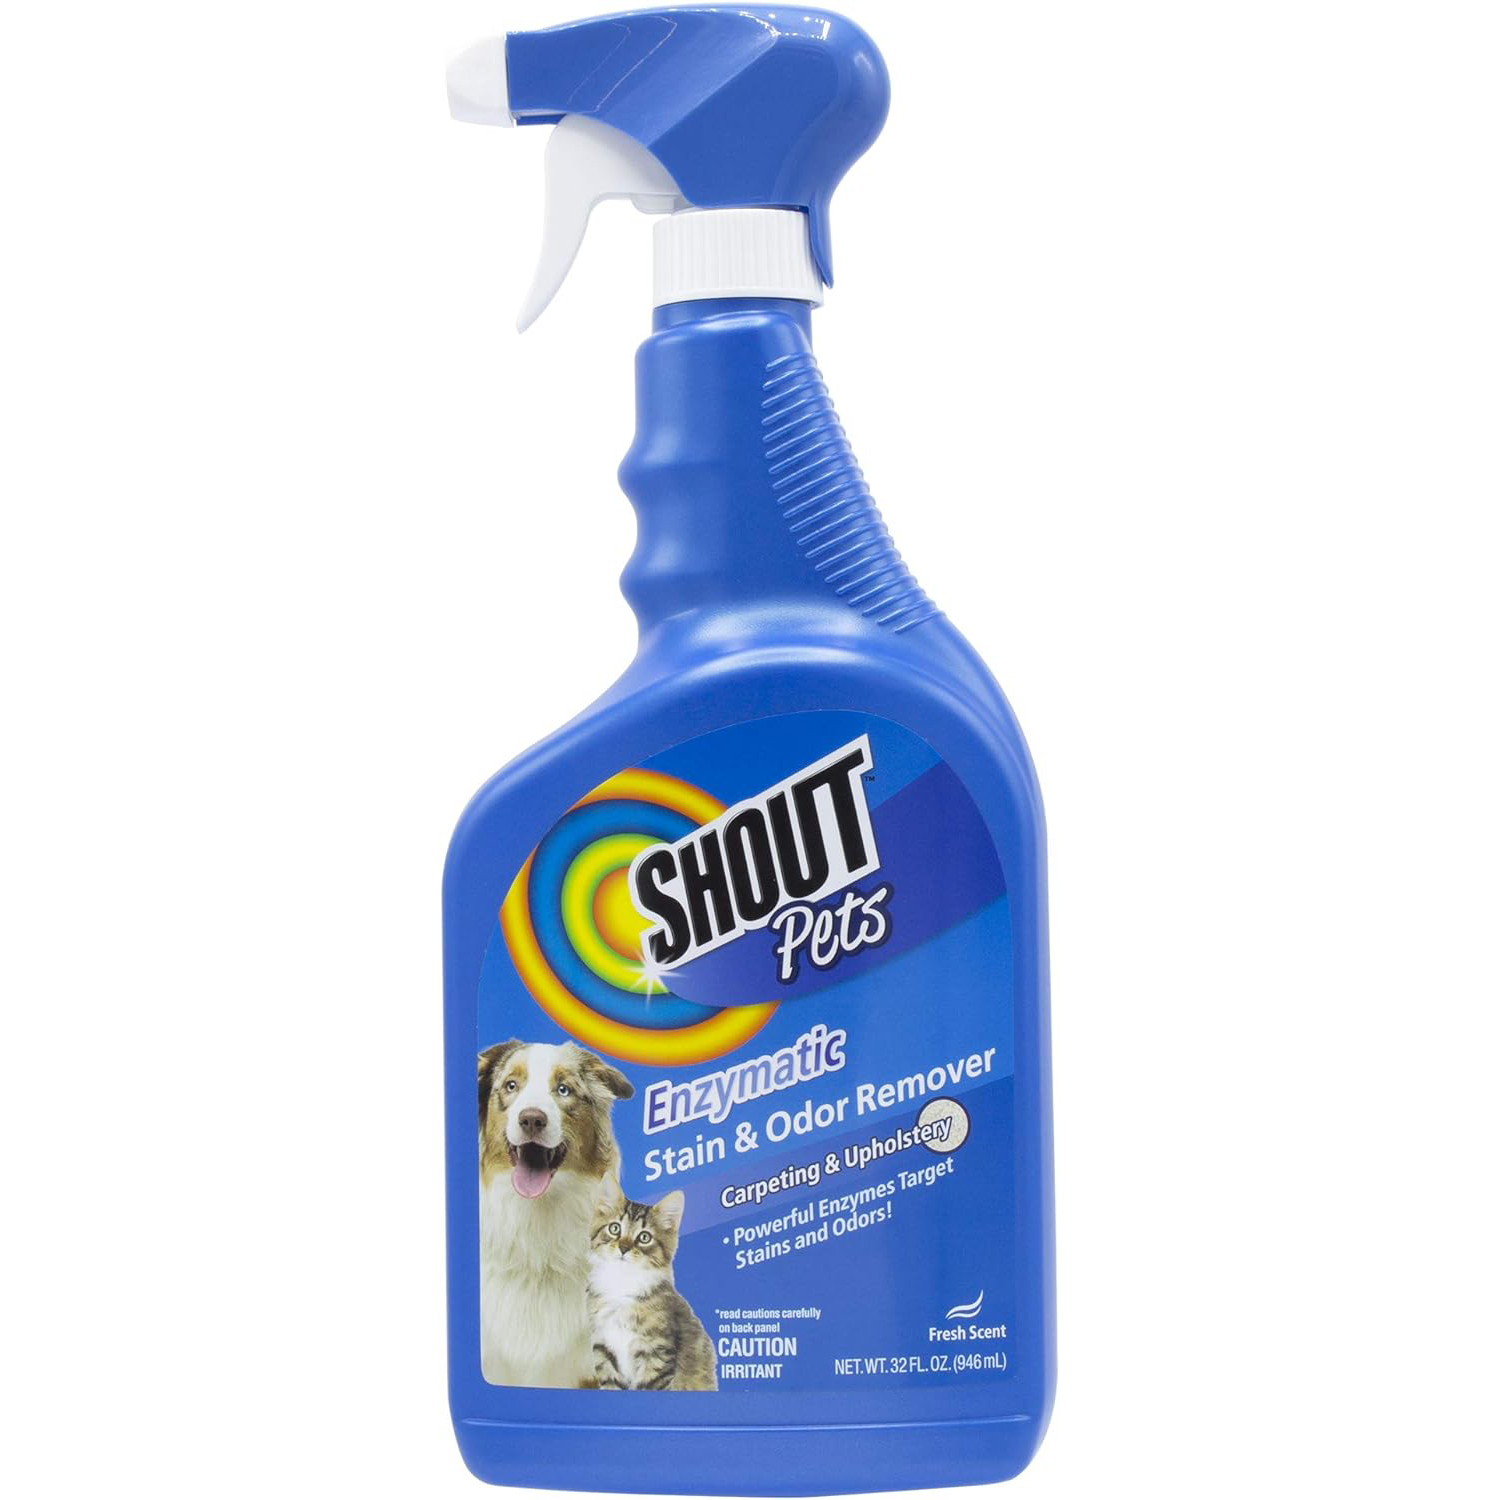 Shout for Pets Enzymatic Stain and Odor Remover